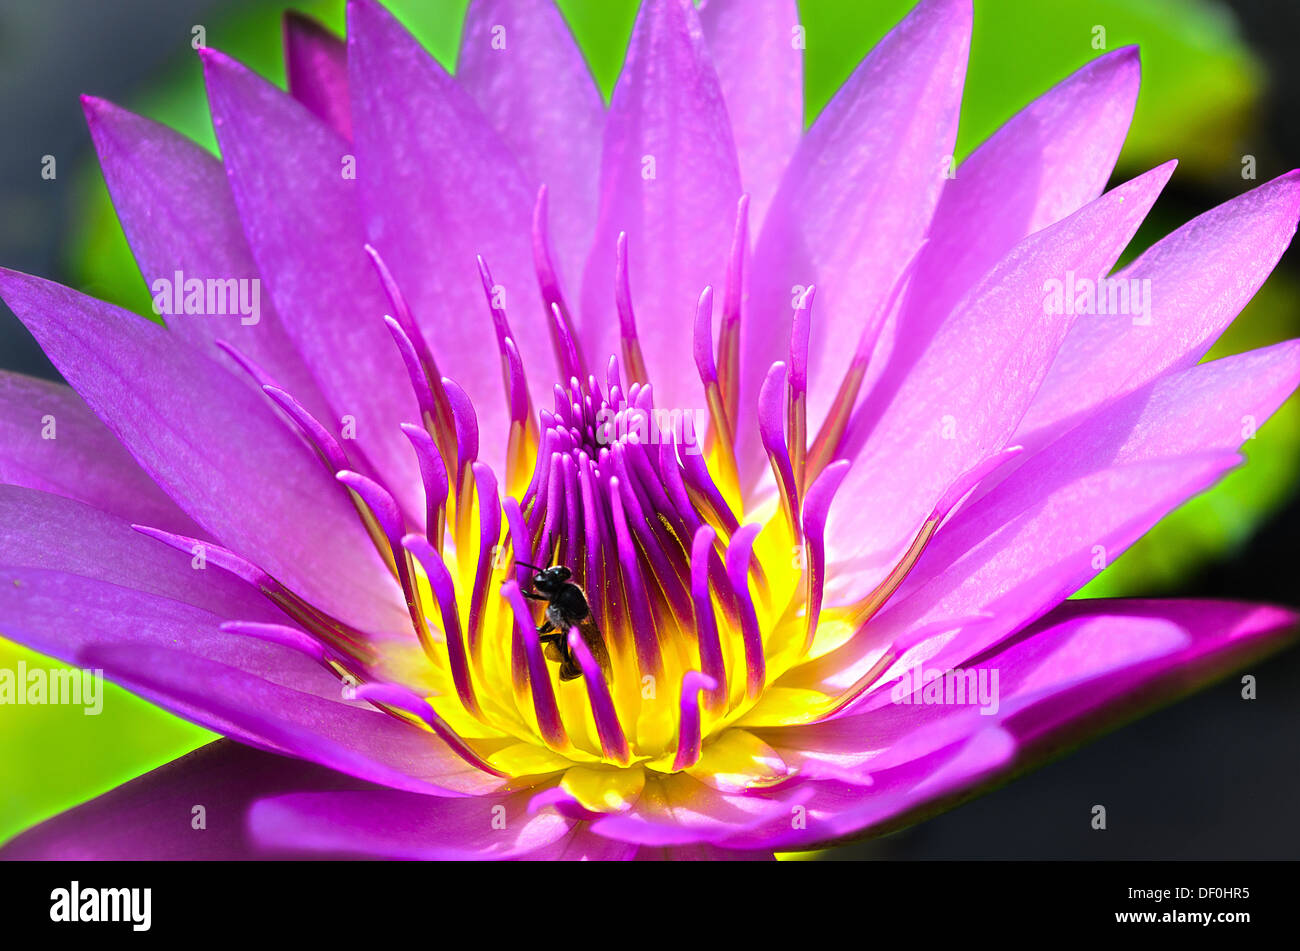 The Pink-Purple Lotus or Water Lily with Yellow-Pink Pollen and Bug. Stock Photo